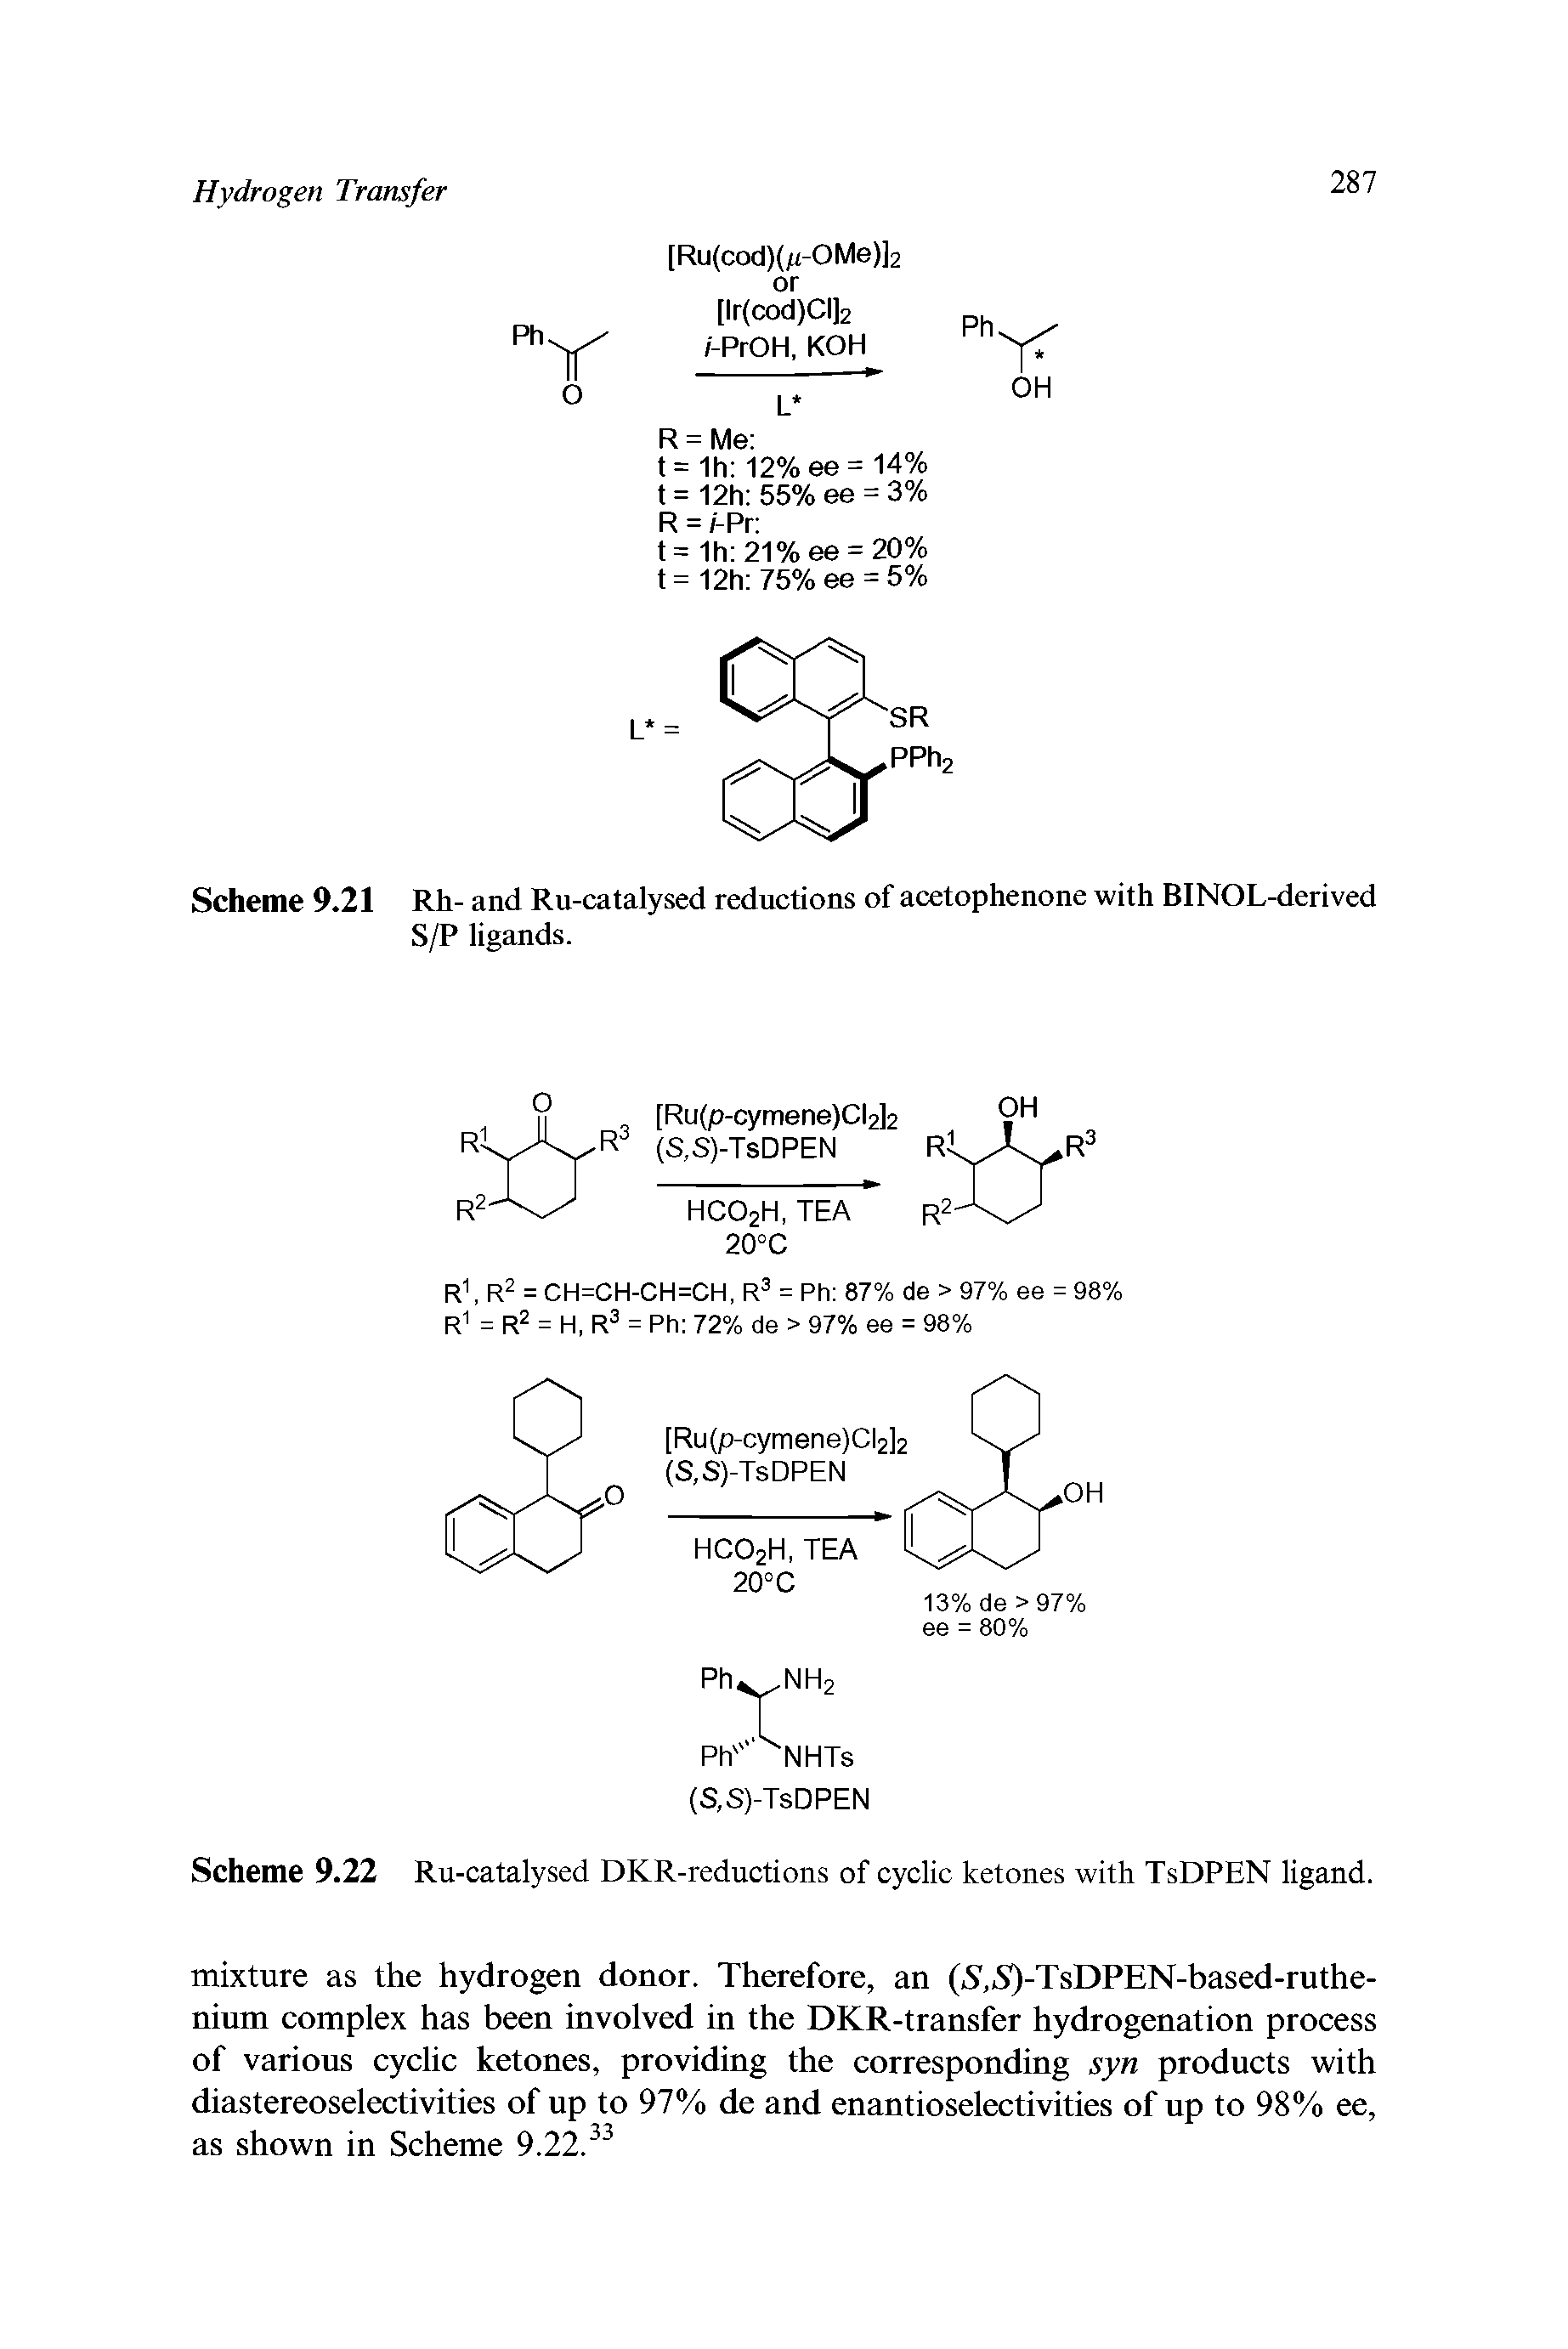 Scheme 9.21 Rh- and Ru-catalysed reductions of acetophenone with BINOL-derived S/P ligands.